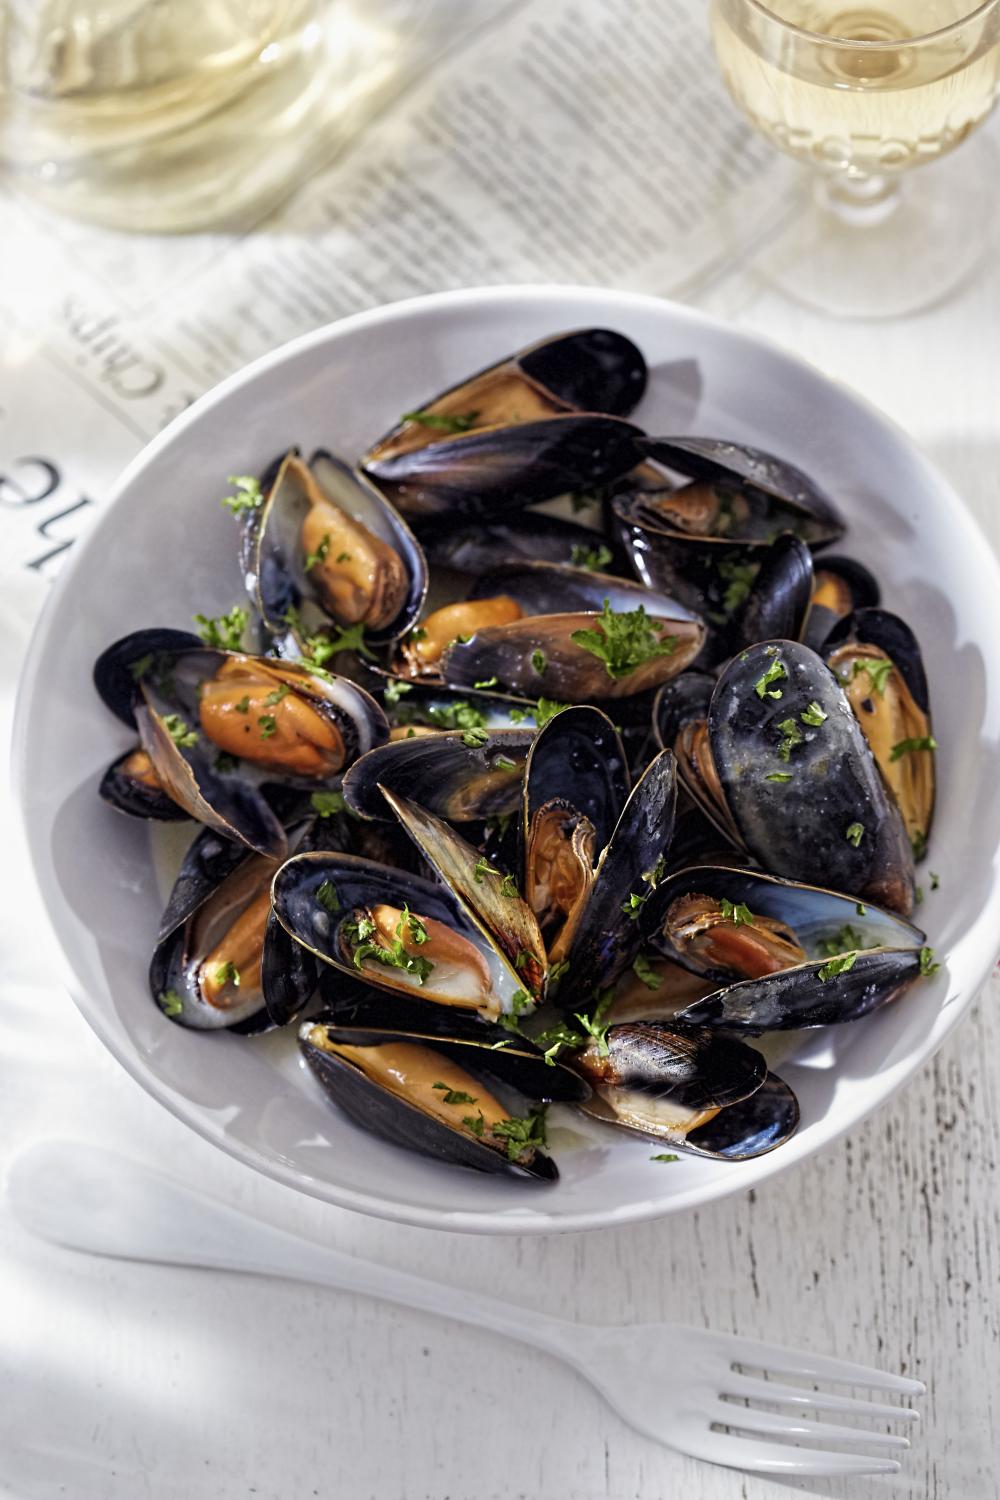 4a-Mussles-Stockfood (1) (1)